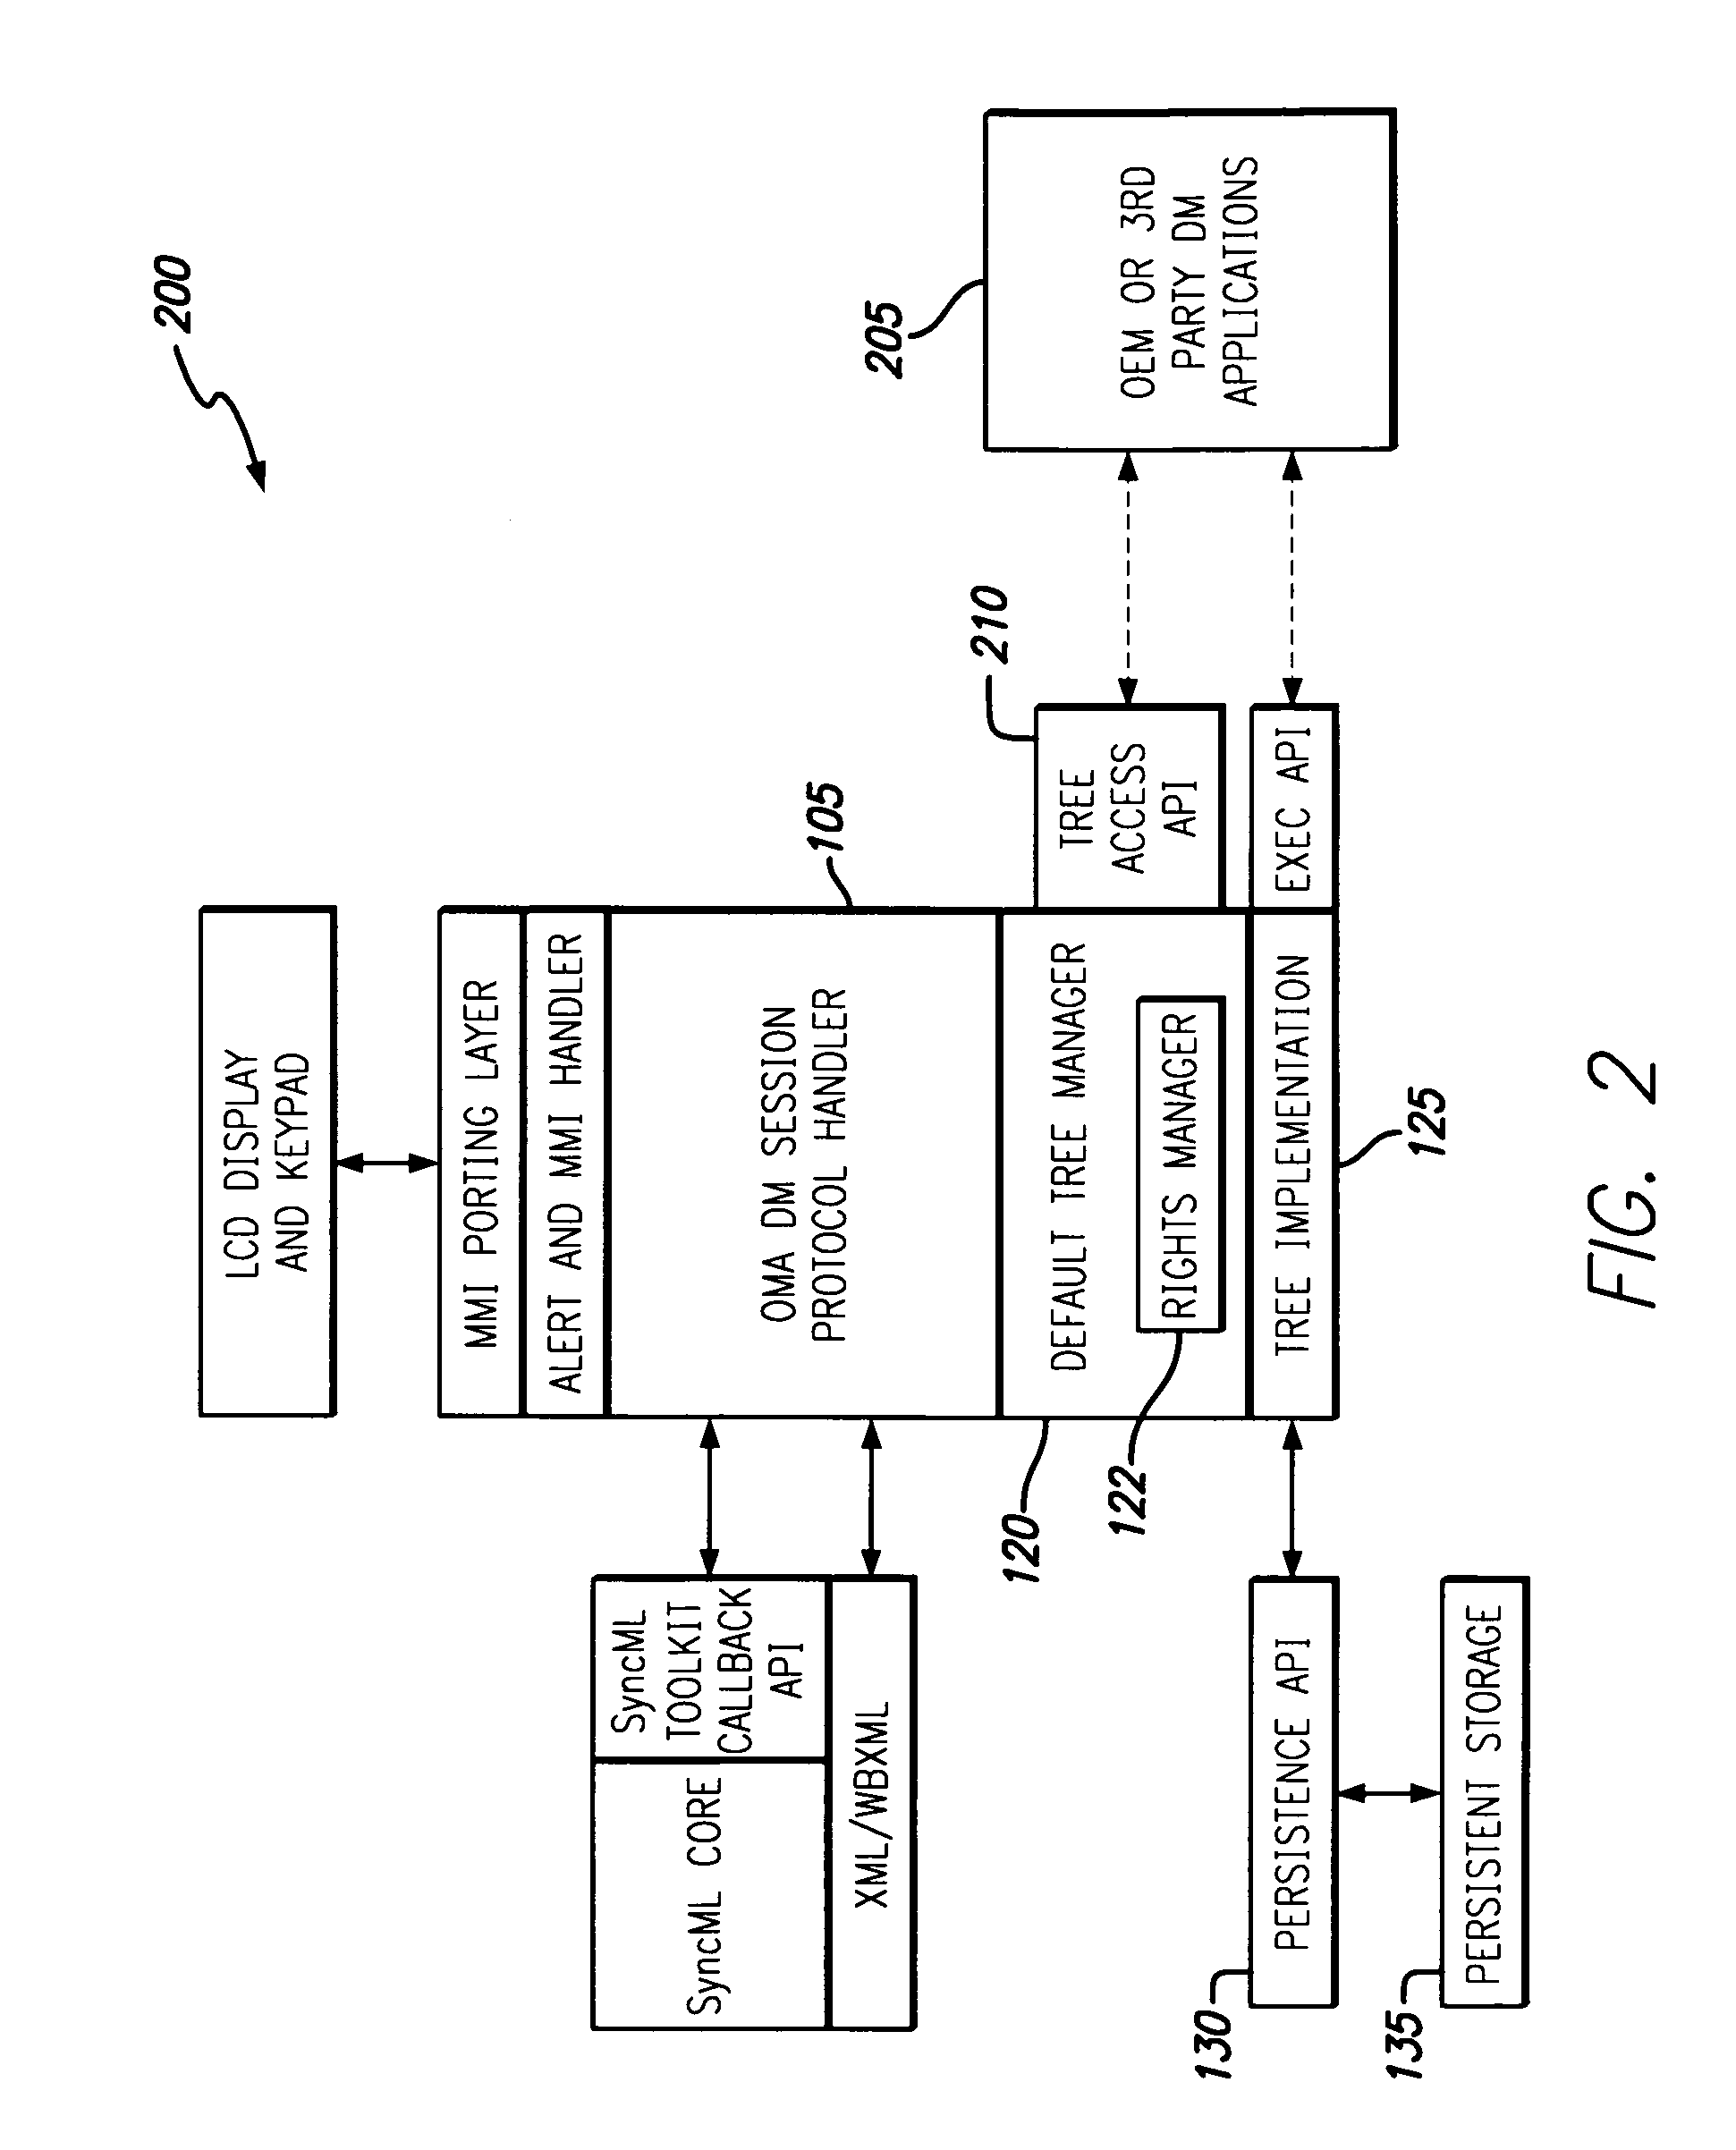 Method of receiving, storing, and providing device management parameters and firmware updates to application programs within a mobile device